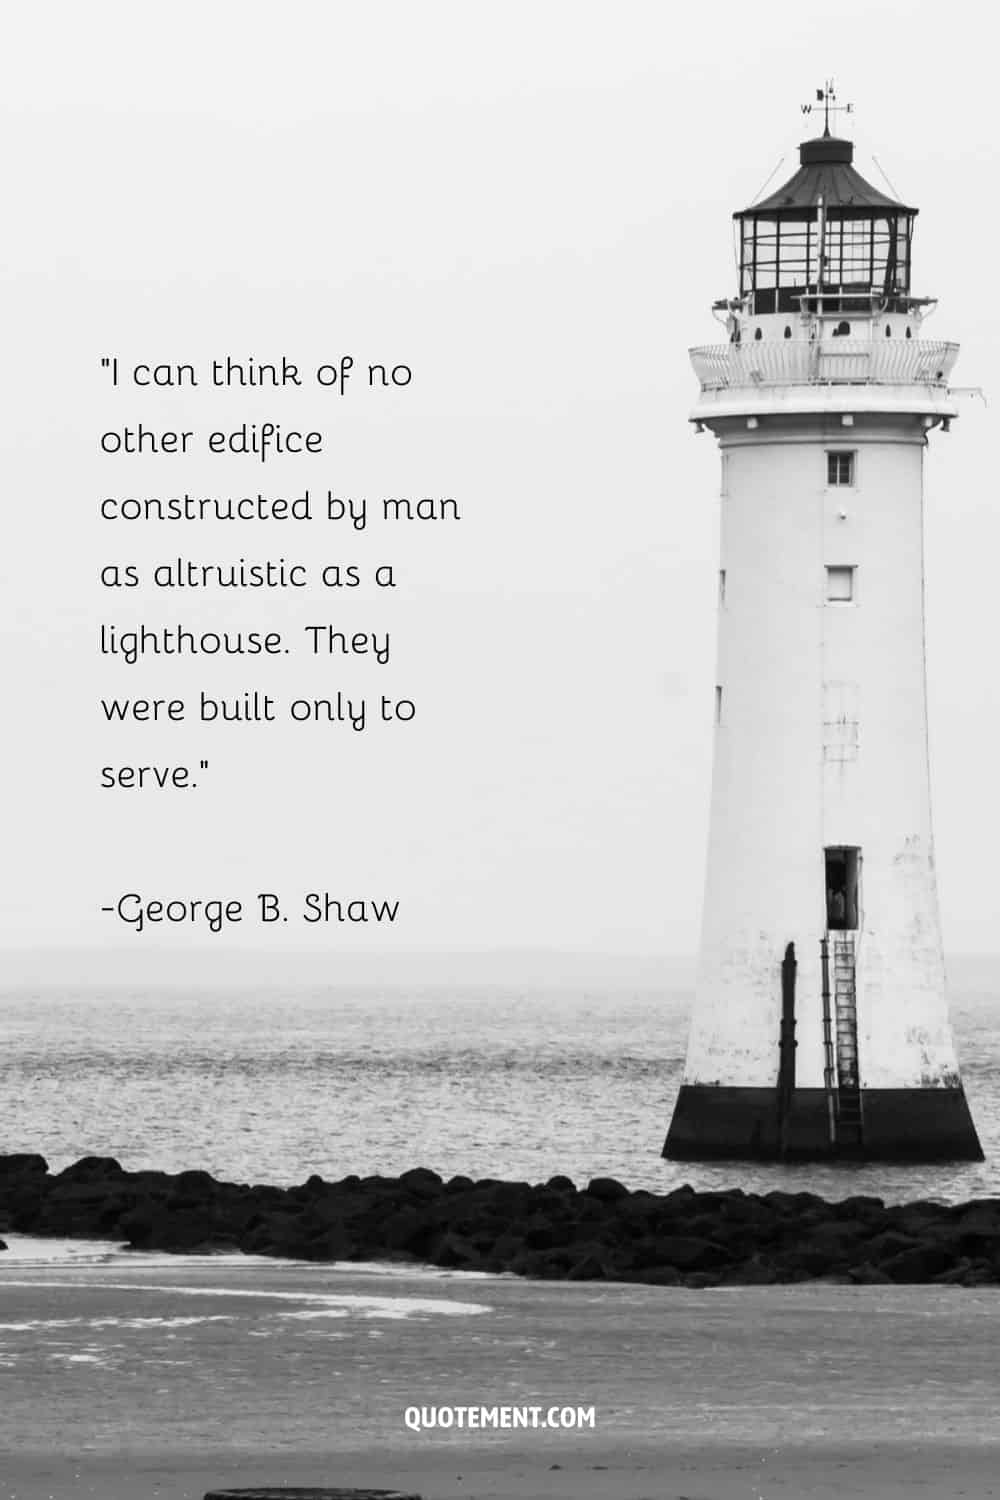 Deep quote on lighthouses by George Bernard Shaw and a lighthouse in black and white